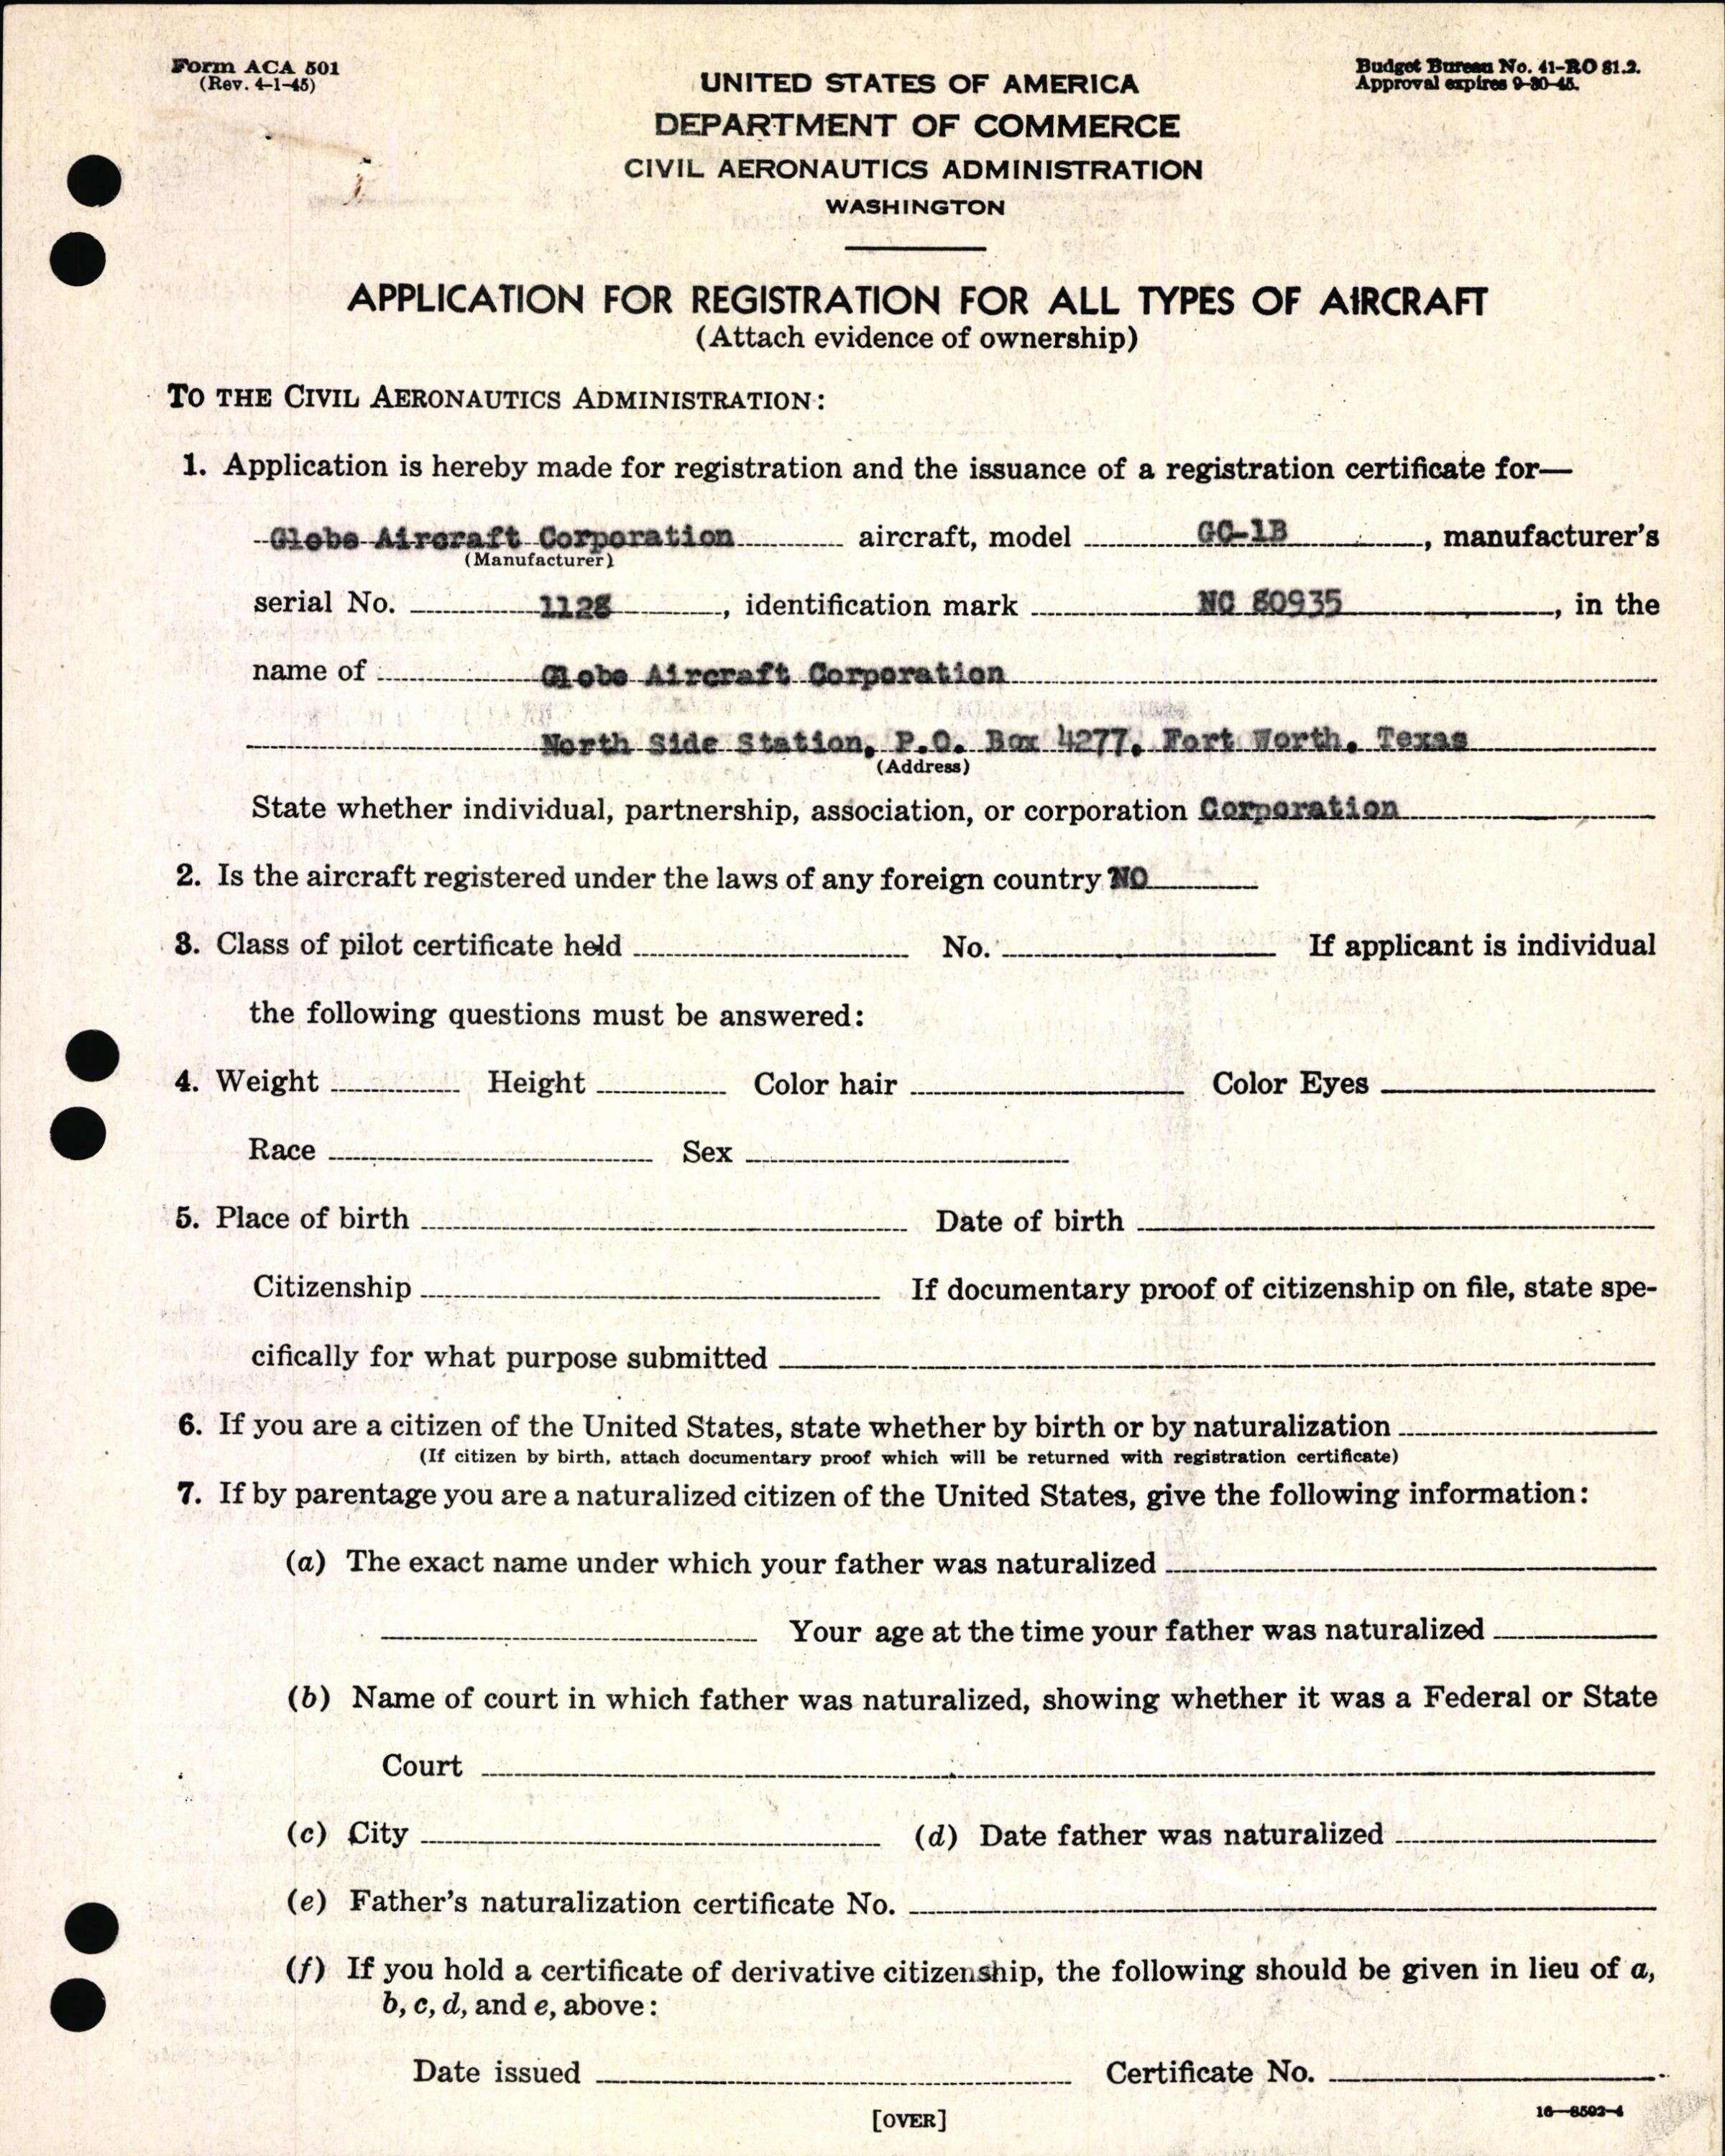 Sample page 3 from AirCorps Library document: Technical Information for Serial Number 1128